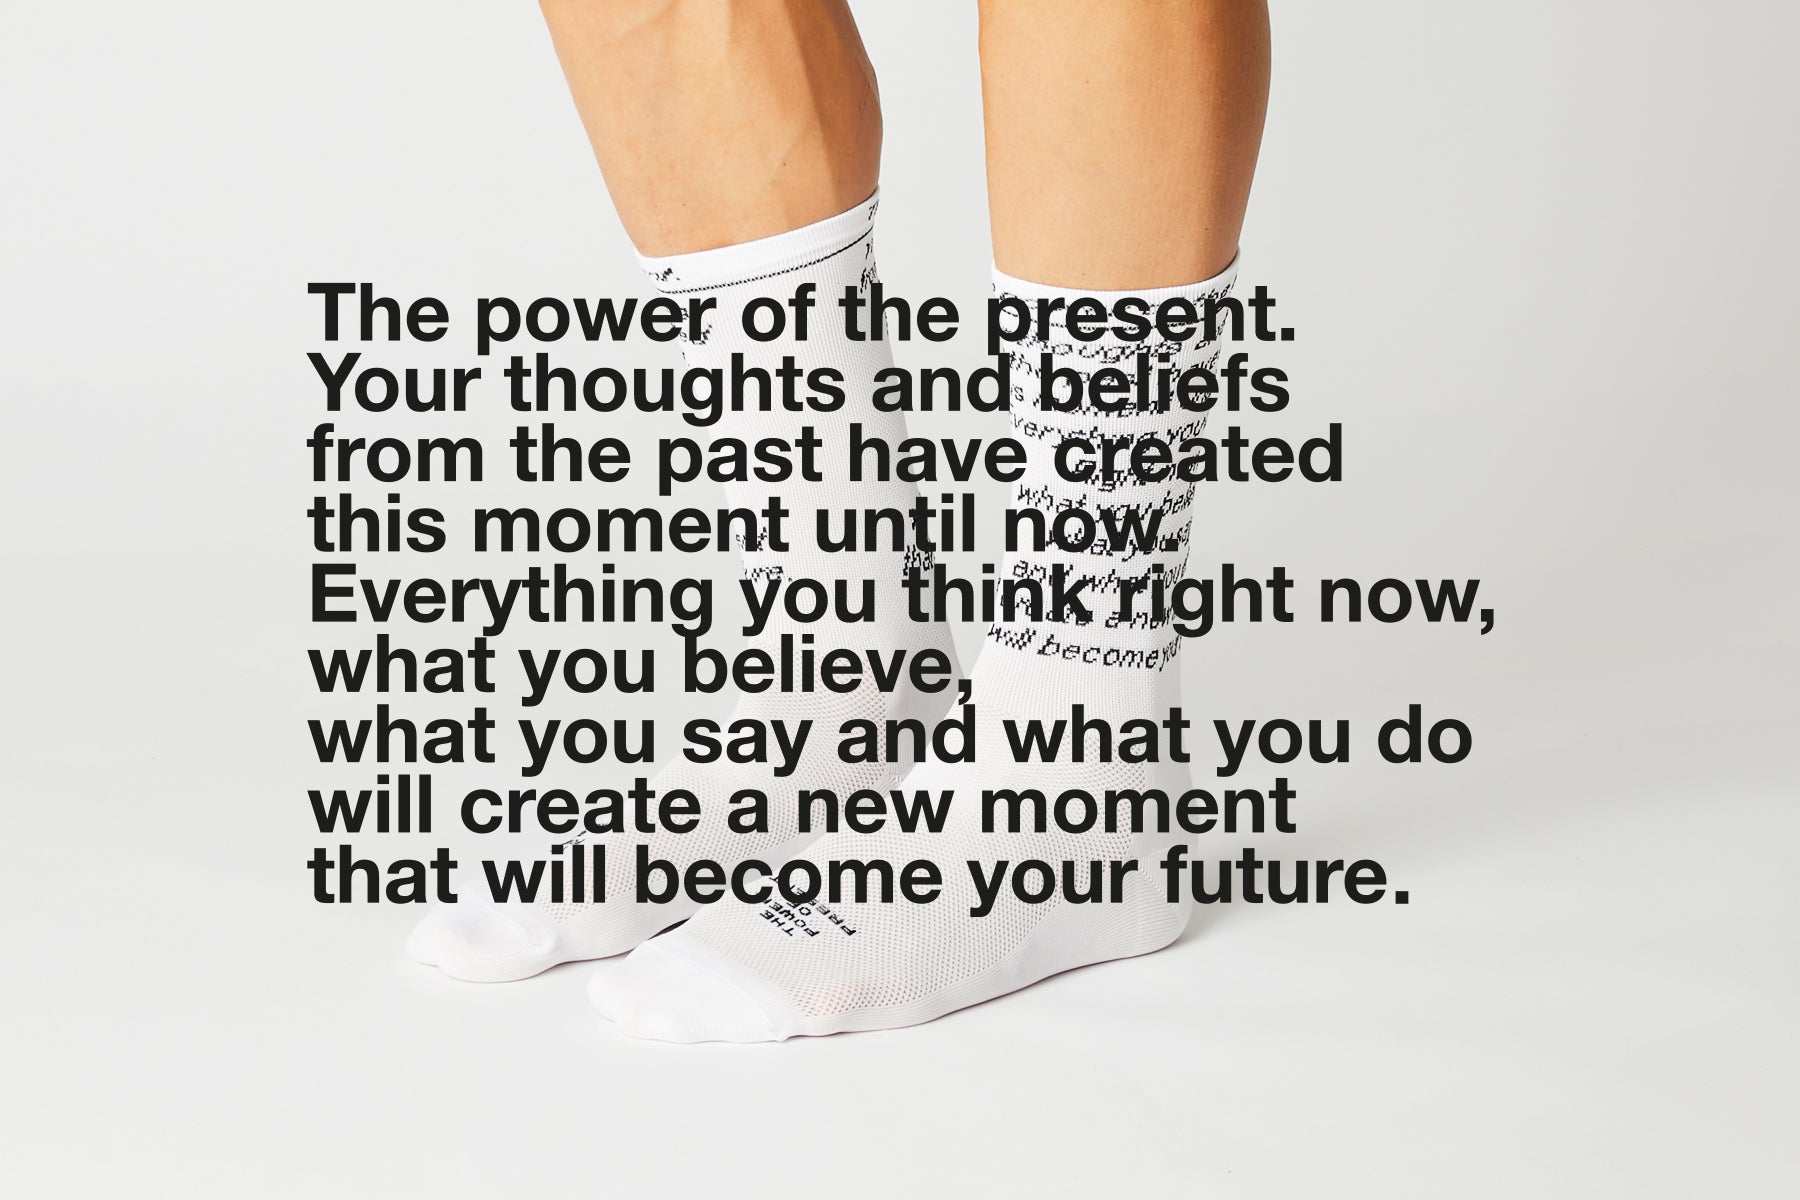 #12_04 THE POWER OF THE PRESENT